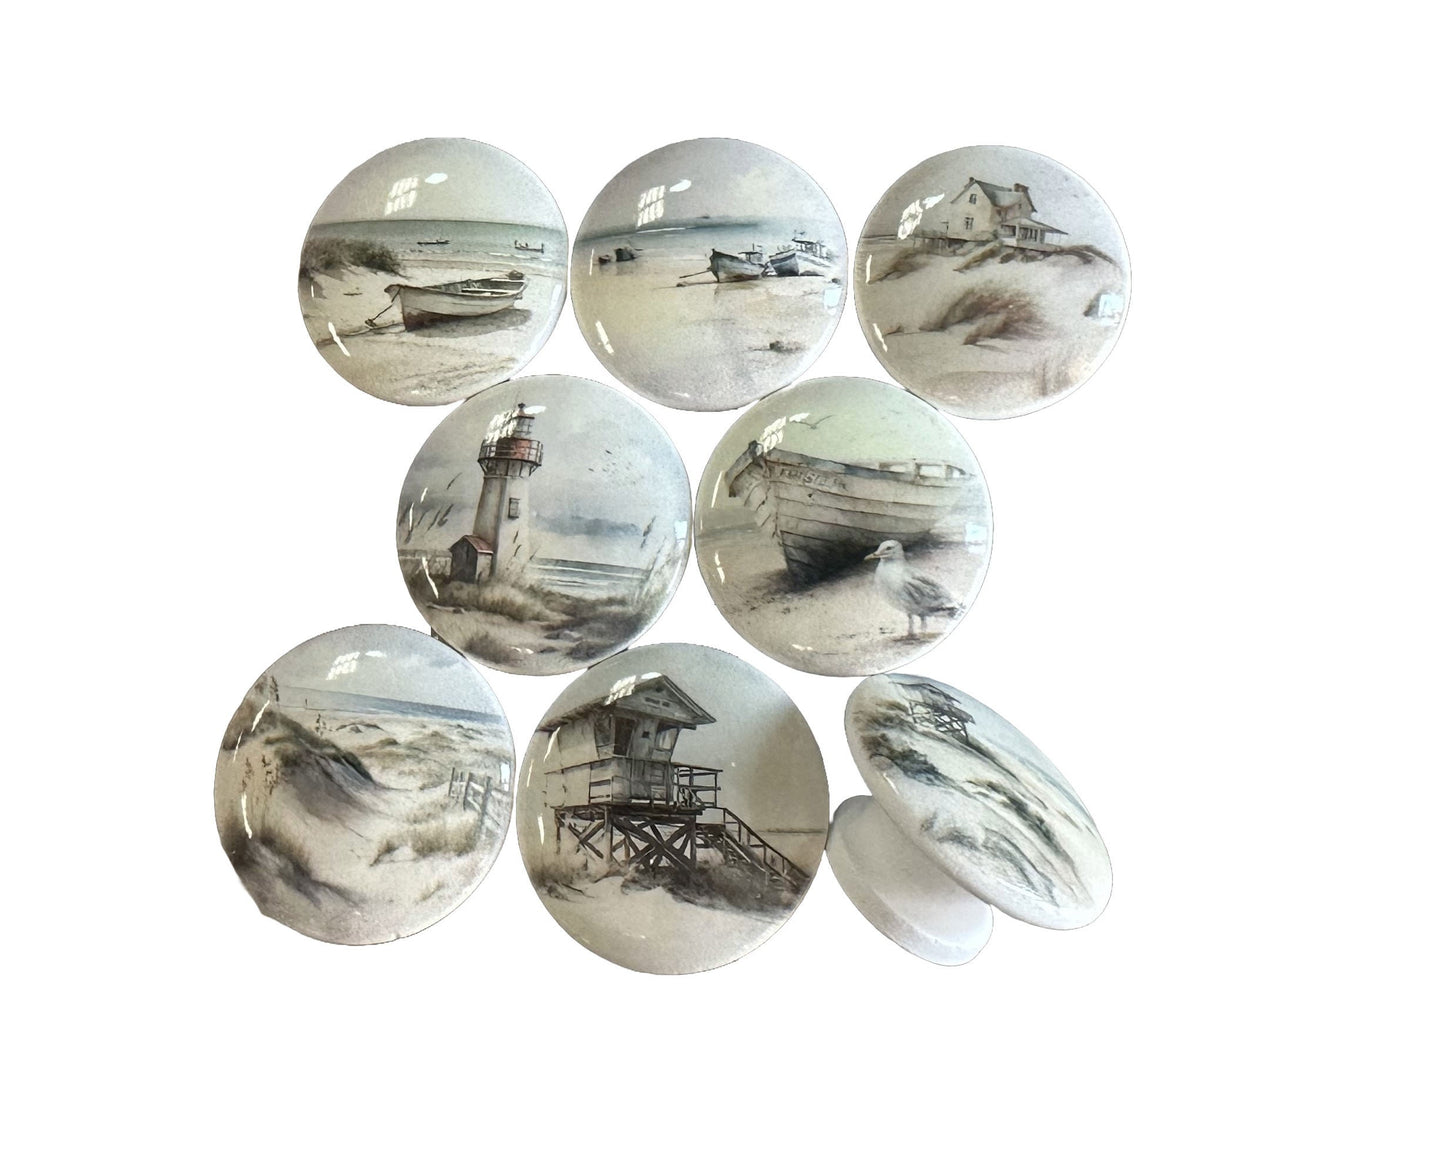 New Release Coastal Watercolor Cabinet and Drawer Knobs, Set of 8 Coastal Watercolor Drawer Knobs and Pulls, Kitchen Cabinet Knobs